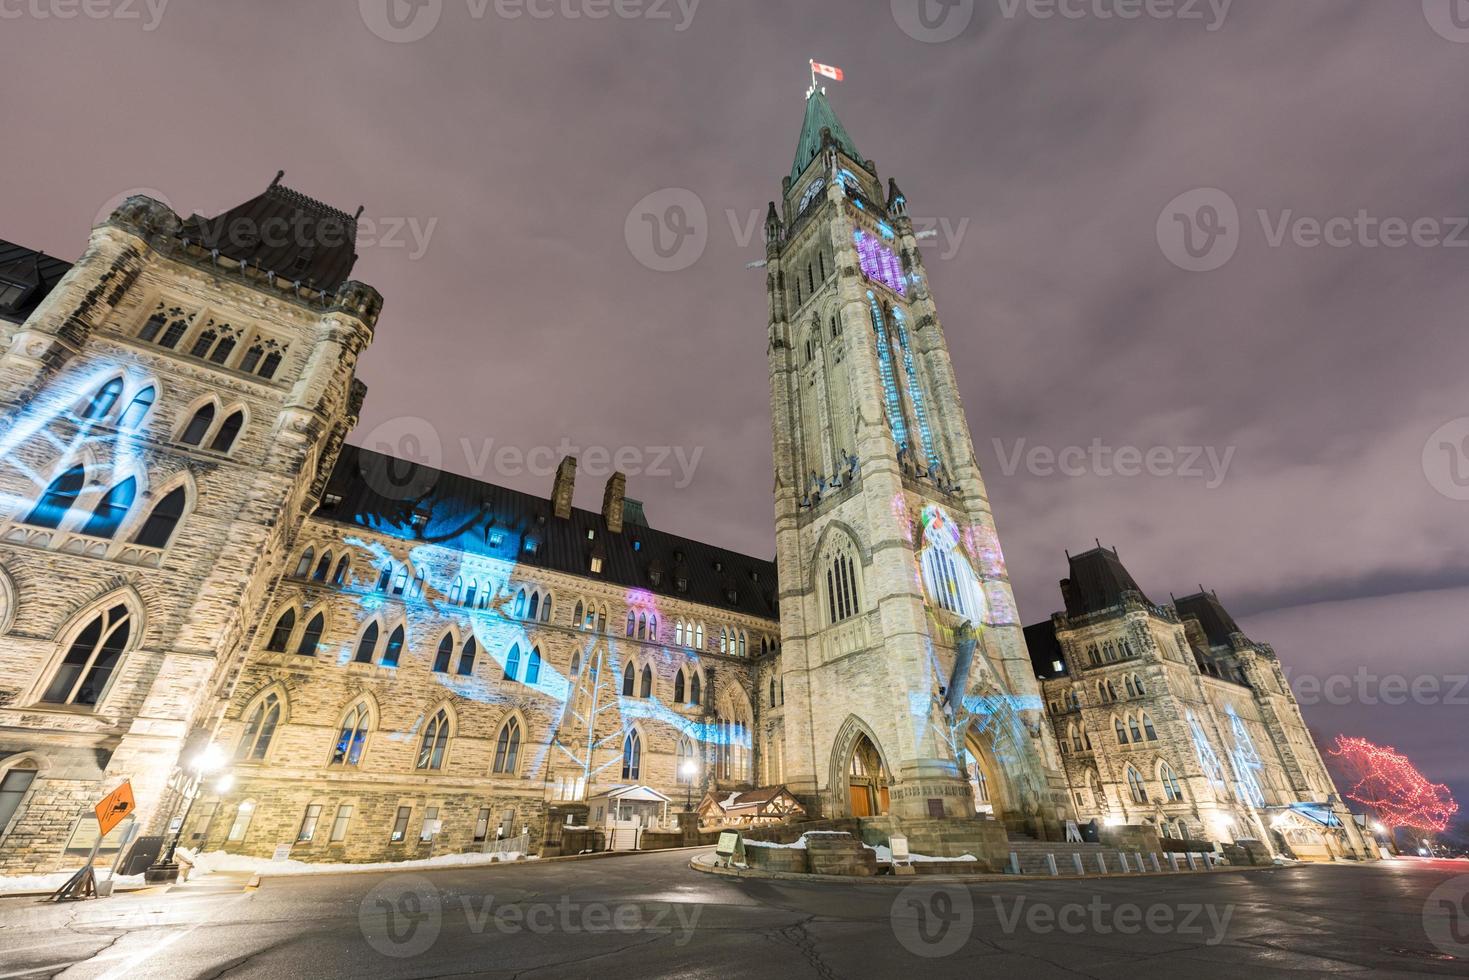 Winter holiday light show projected at night on the Canadian House of Parliament to celebrate the 150th Anniversary of Canada in Ottawa, Canada. photo